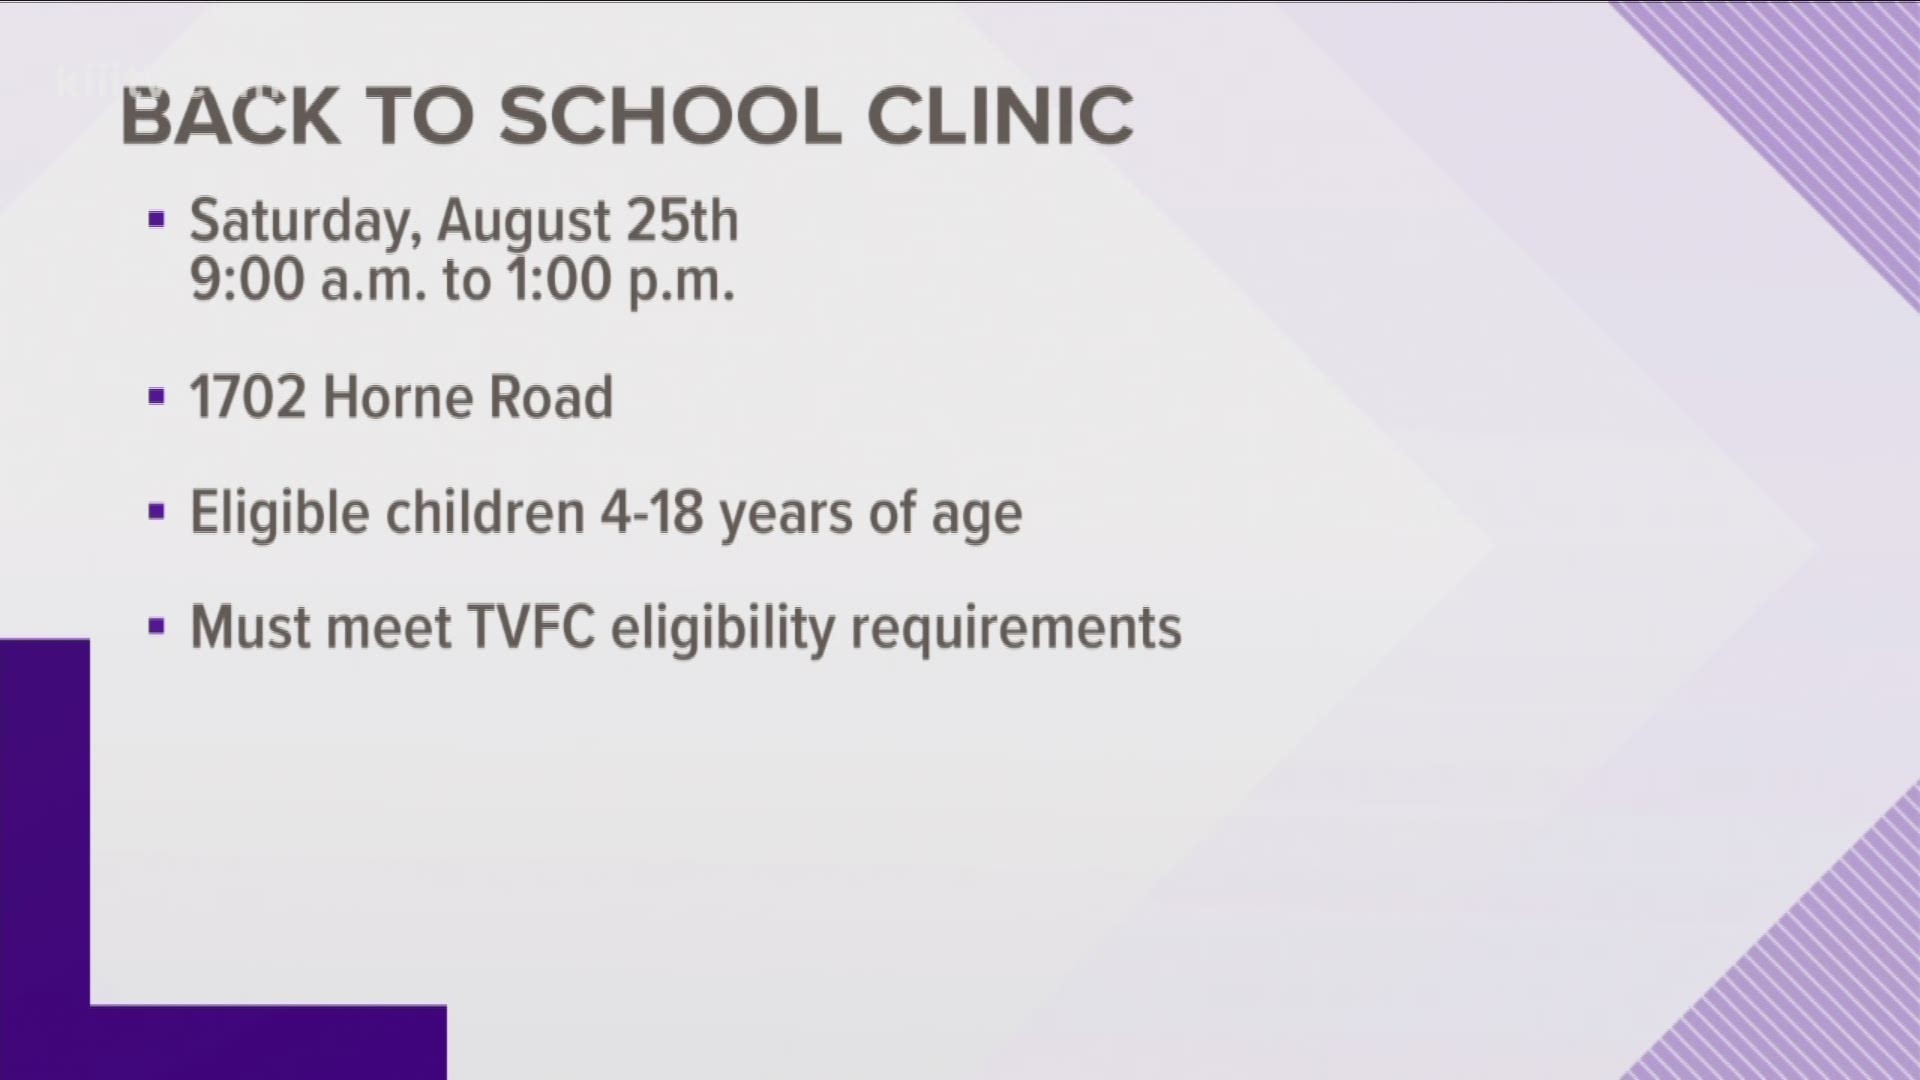 Nurses and doctors with the City-County Public Health District want to make sure your children are up to date on their immunizations, so they are hosting a vaccine clinic on Saturday, Aug. 25.